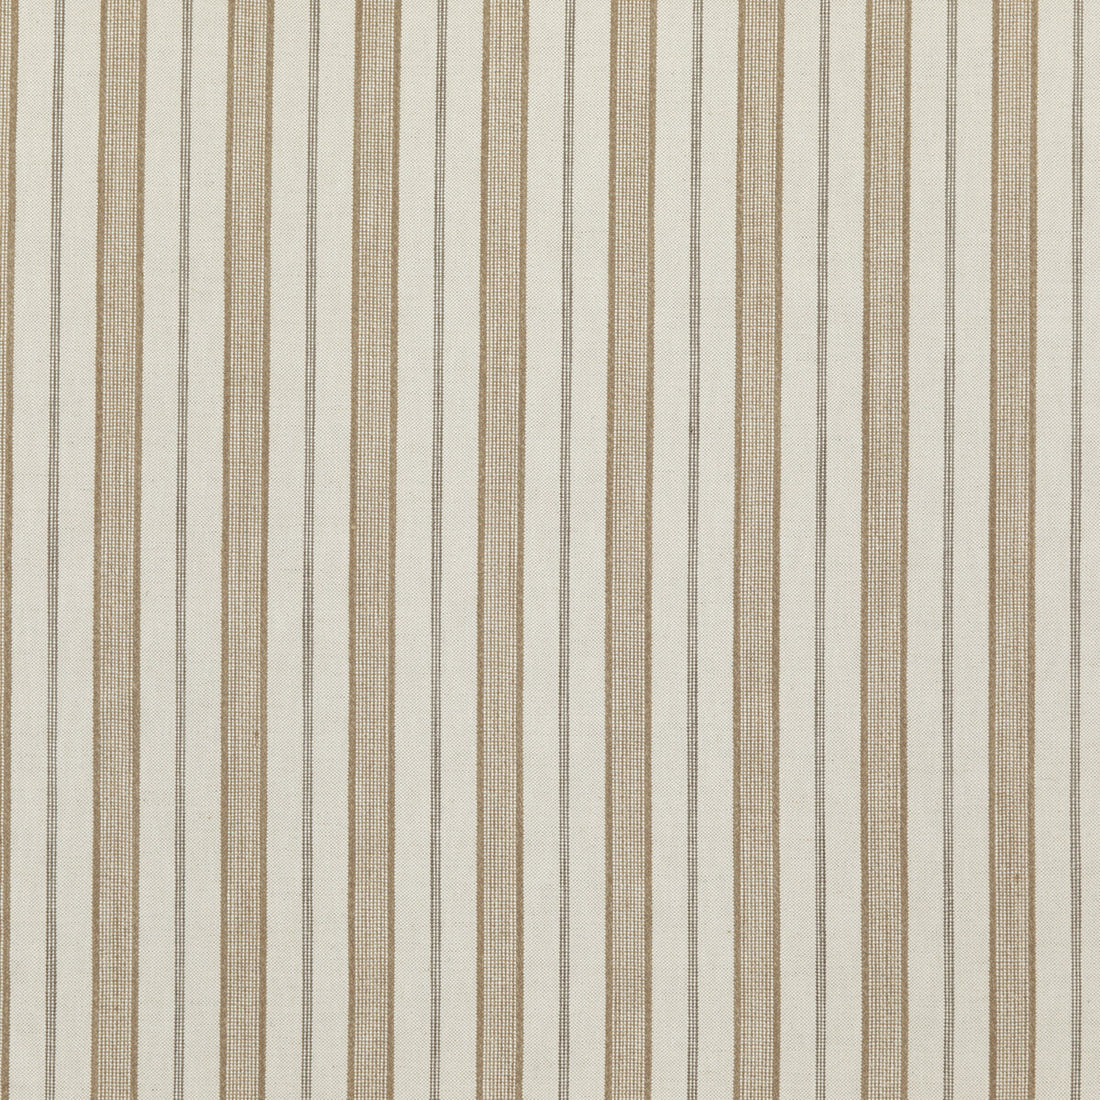 Stirling fabric in taupe color - pattern ED85313.210.0 - by Threads in the Great Stripes collection